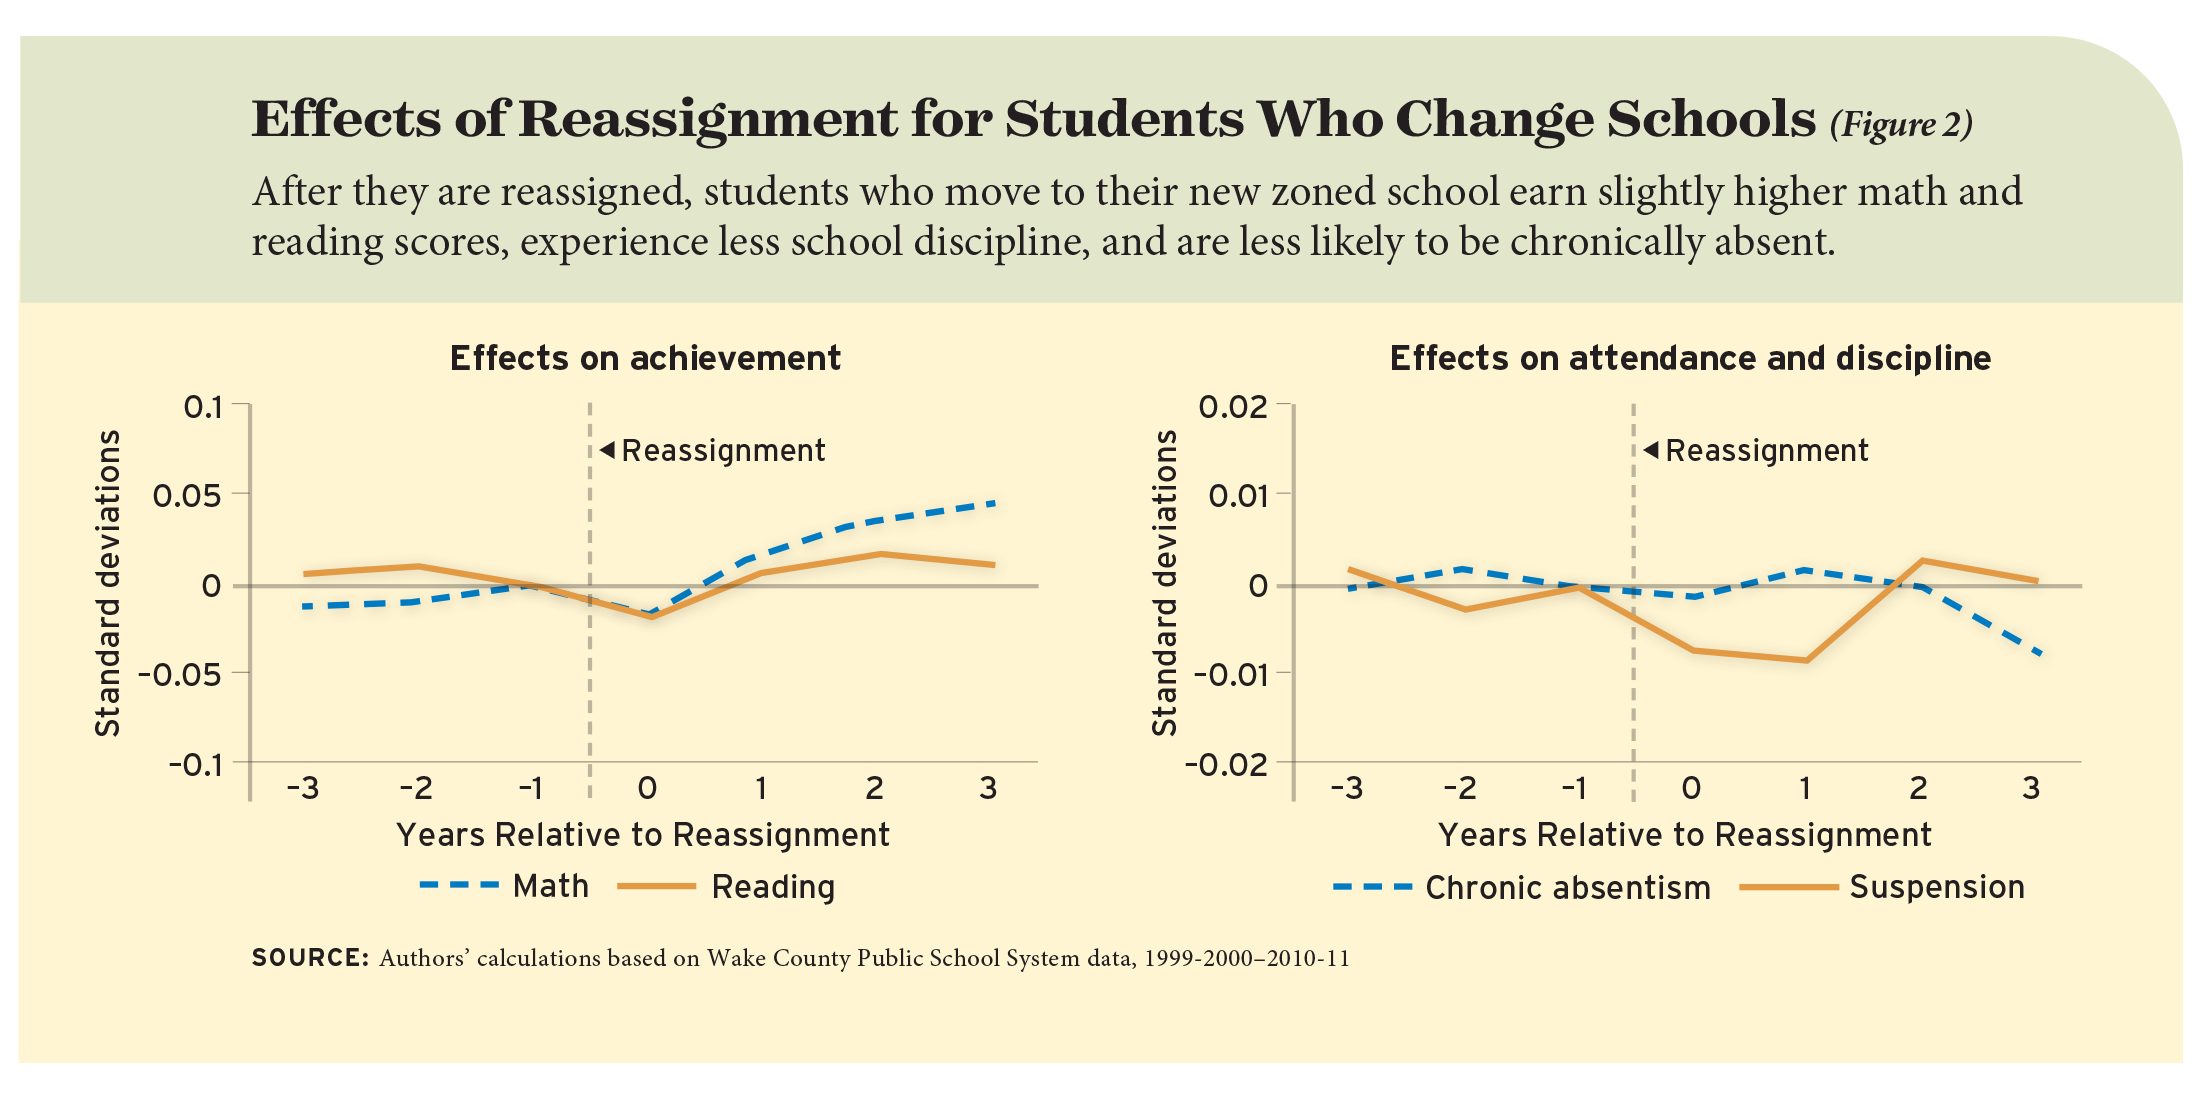 Effects of Reassignment for Students Who Change Schools (Figure 2)